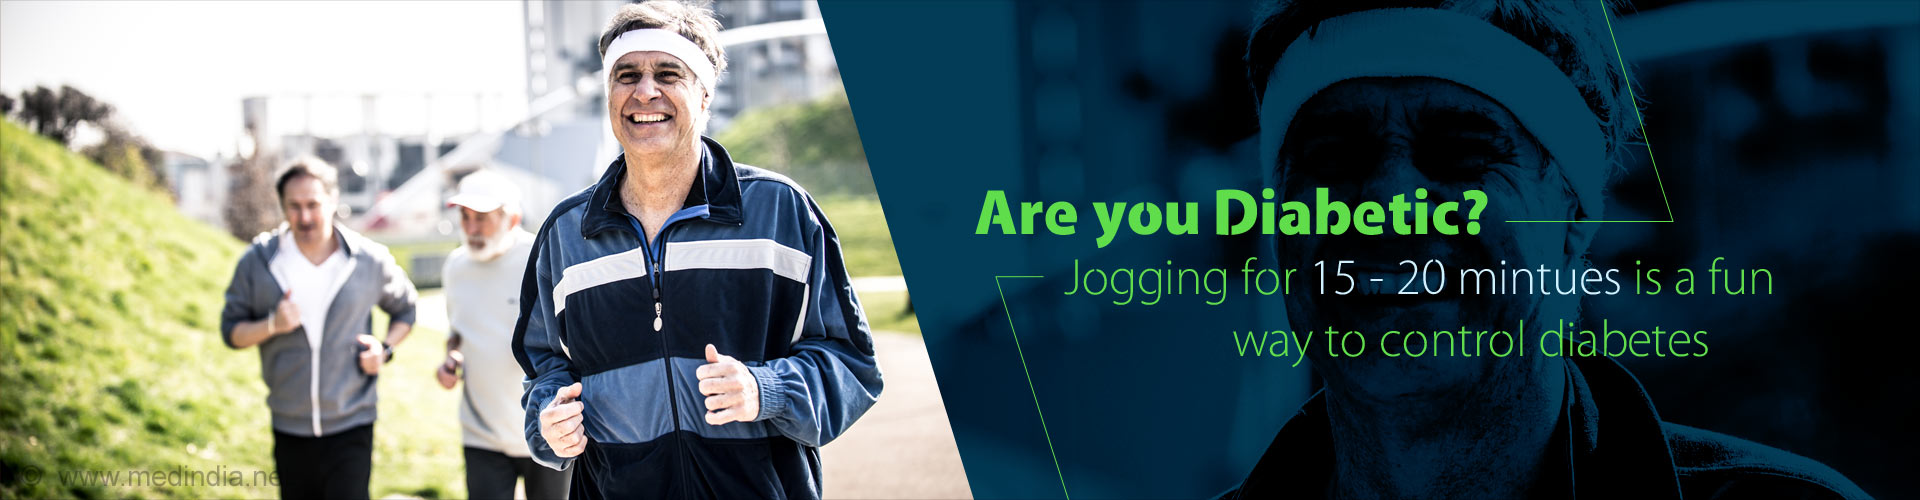  Are you Diabetic? Jogging for 15 minutes is a fun way to control diabetes.